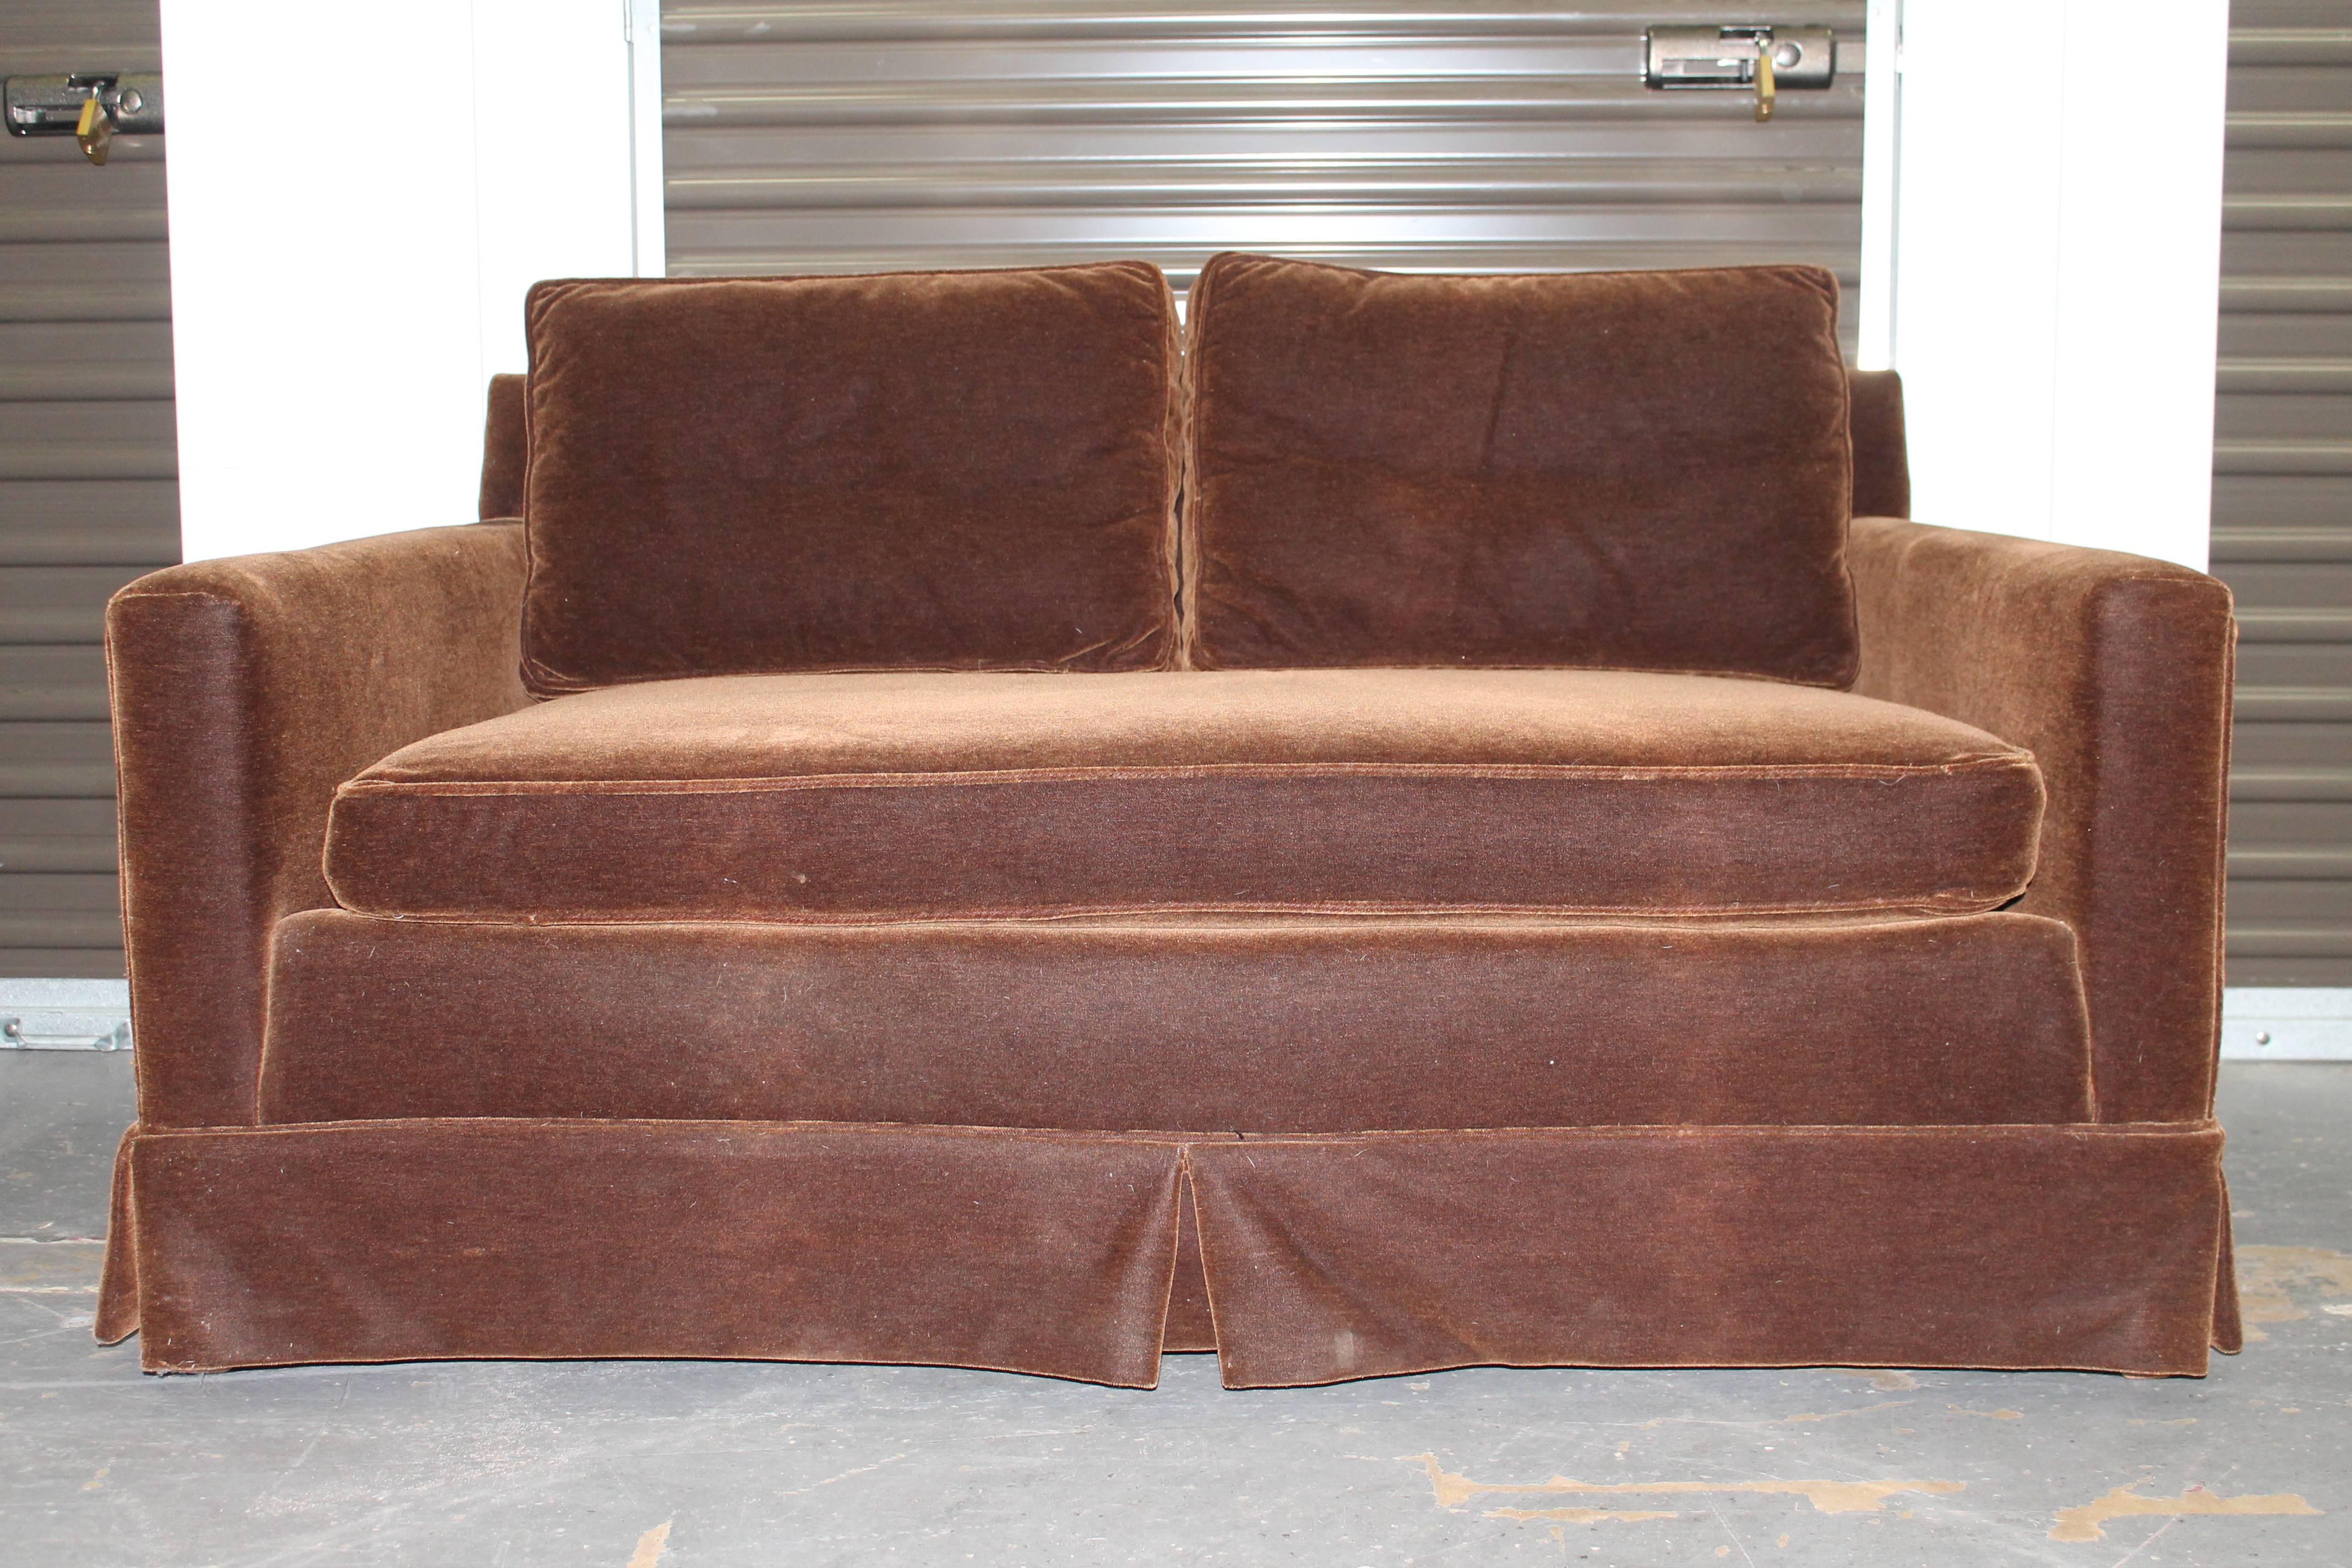 A very grand Mid-Century Modern loveseat. Newly reupholstered in chocolate mohair, circa 1970s. Very well built and custom-made. This sofa would be very, very expensive in a design showroom. Seat depth 22